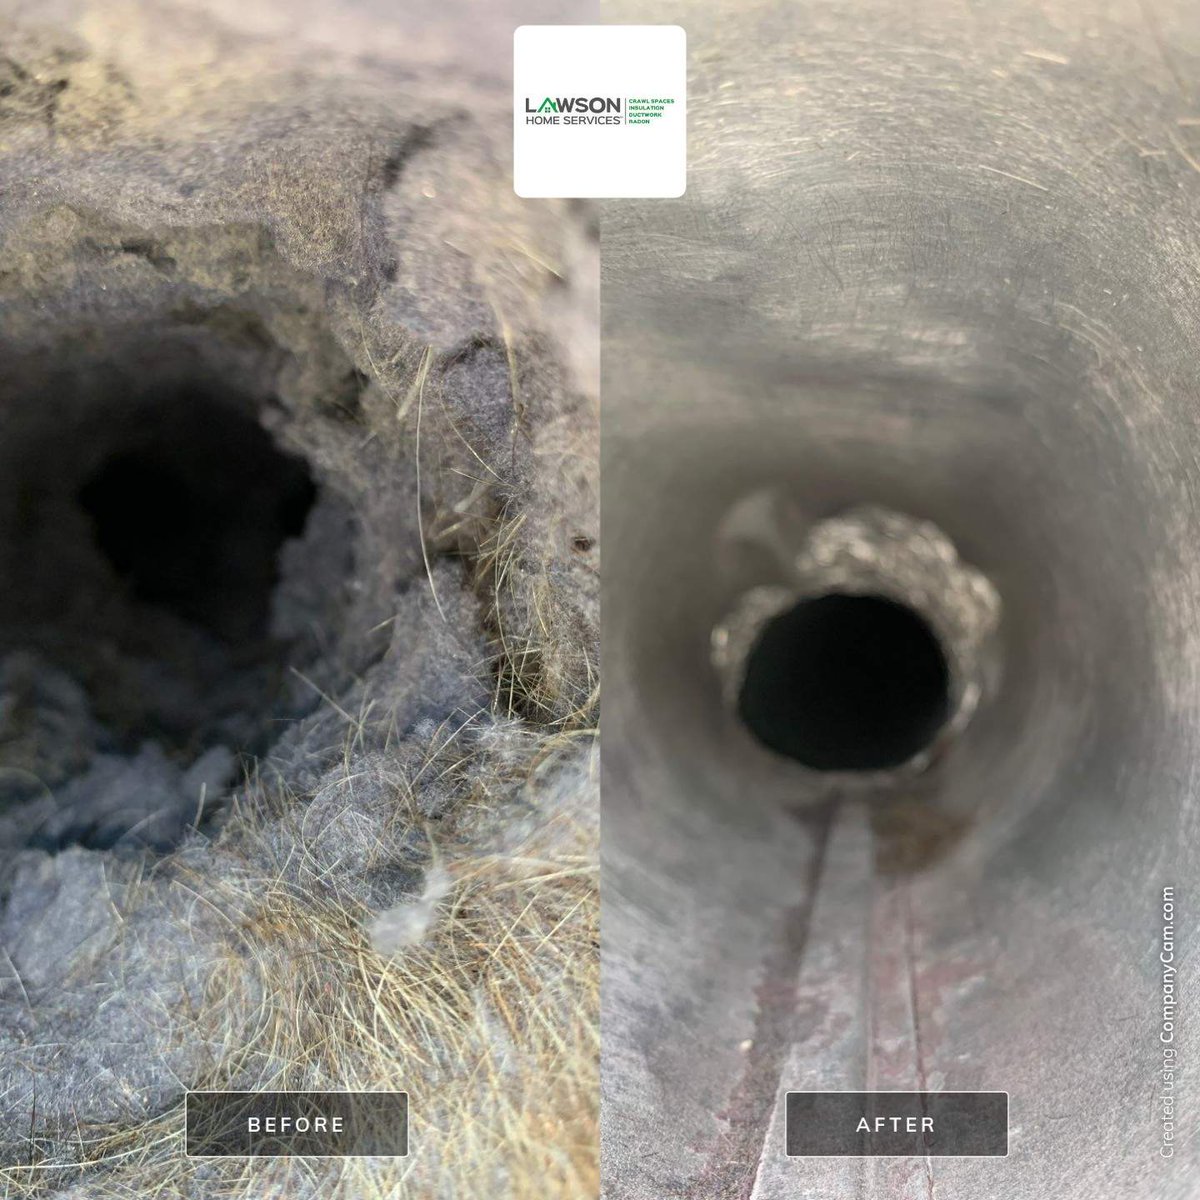 Have you had your dryer vent cleaned this year? Dirty dryer vent are the #1 cause of house fires. It's recommended to have your dryer vent inspected every year.

Call to schedule an appointment today! 

#DryerVentCleaning